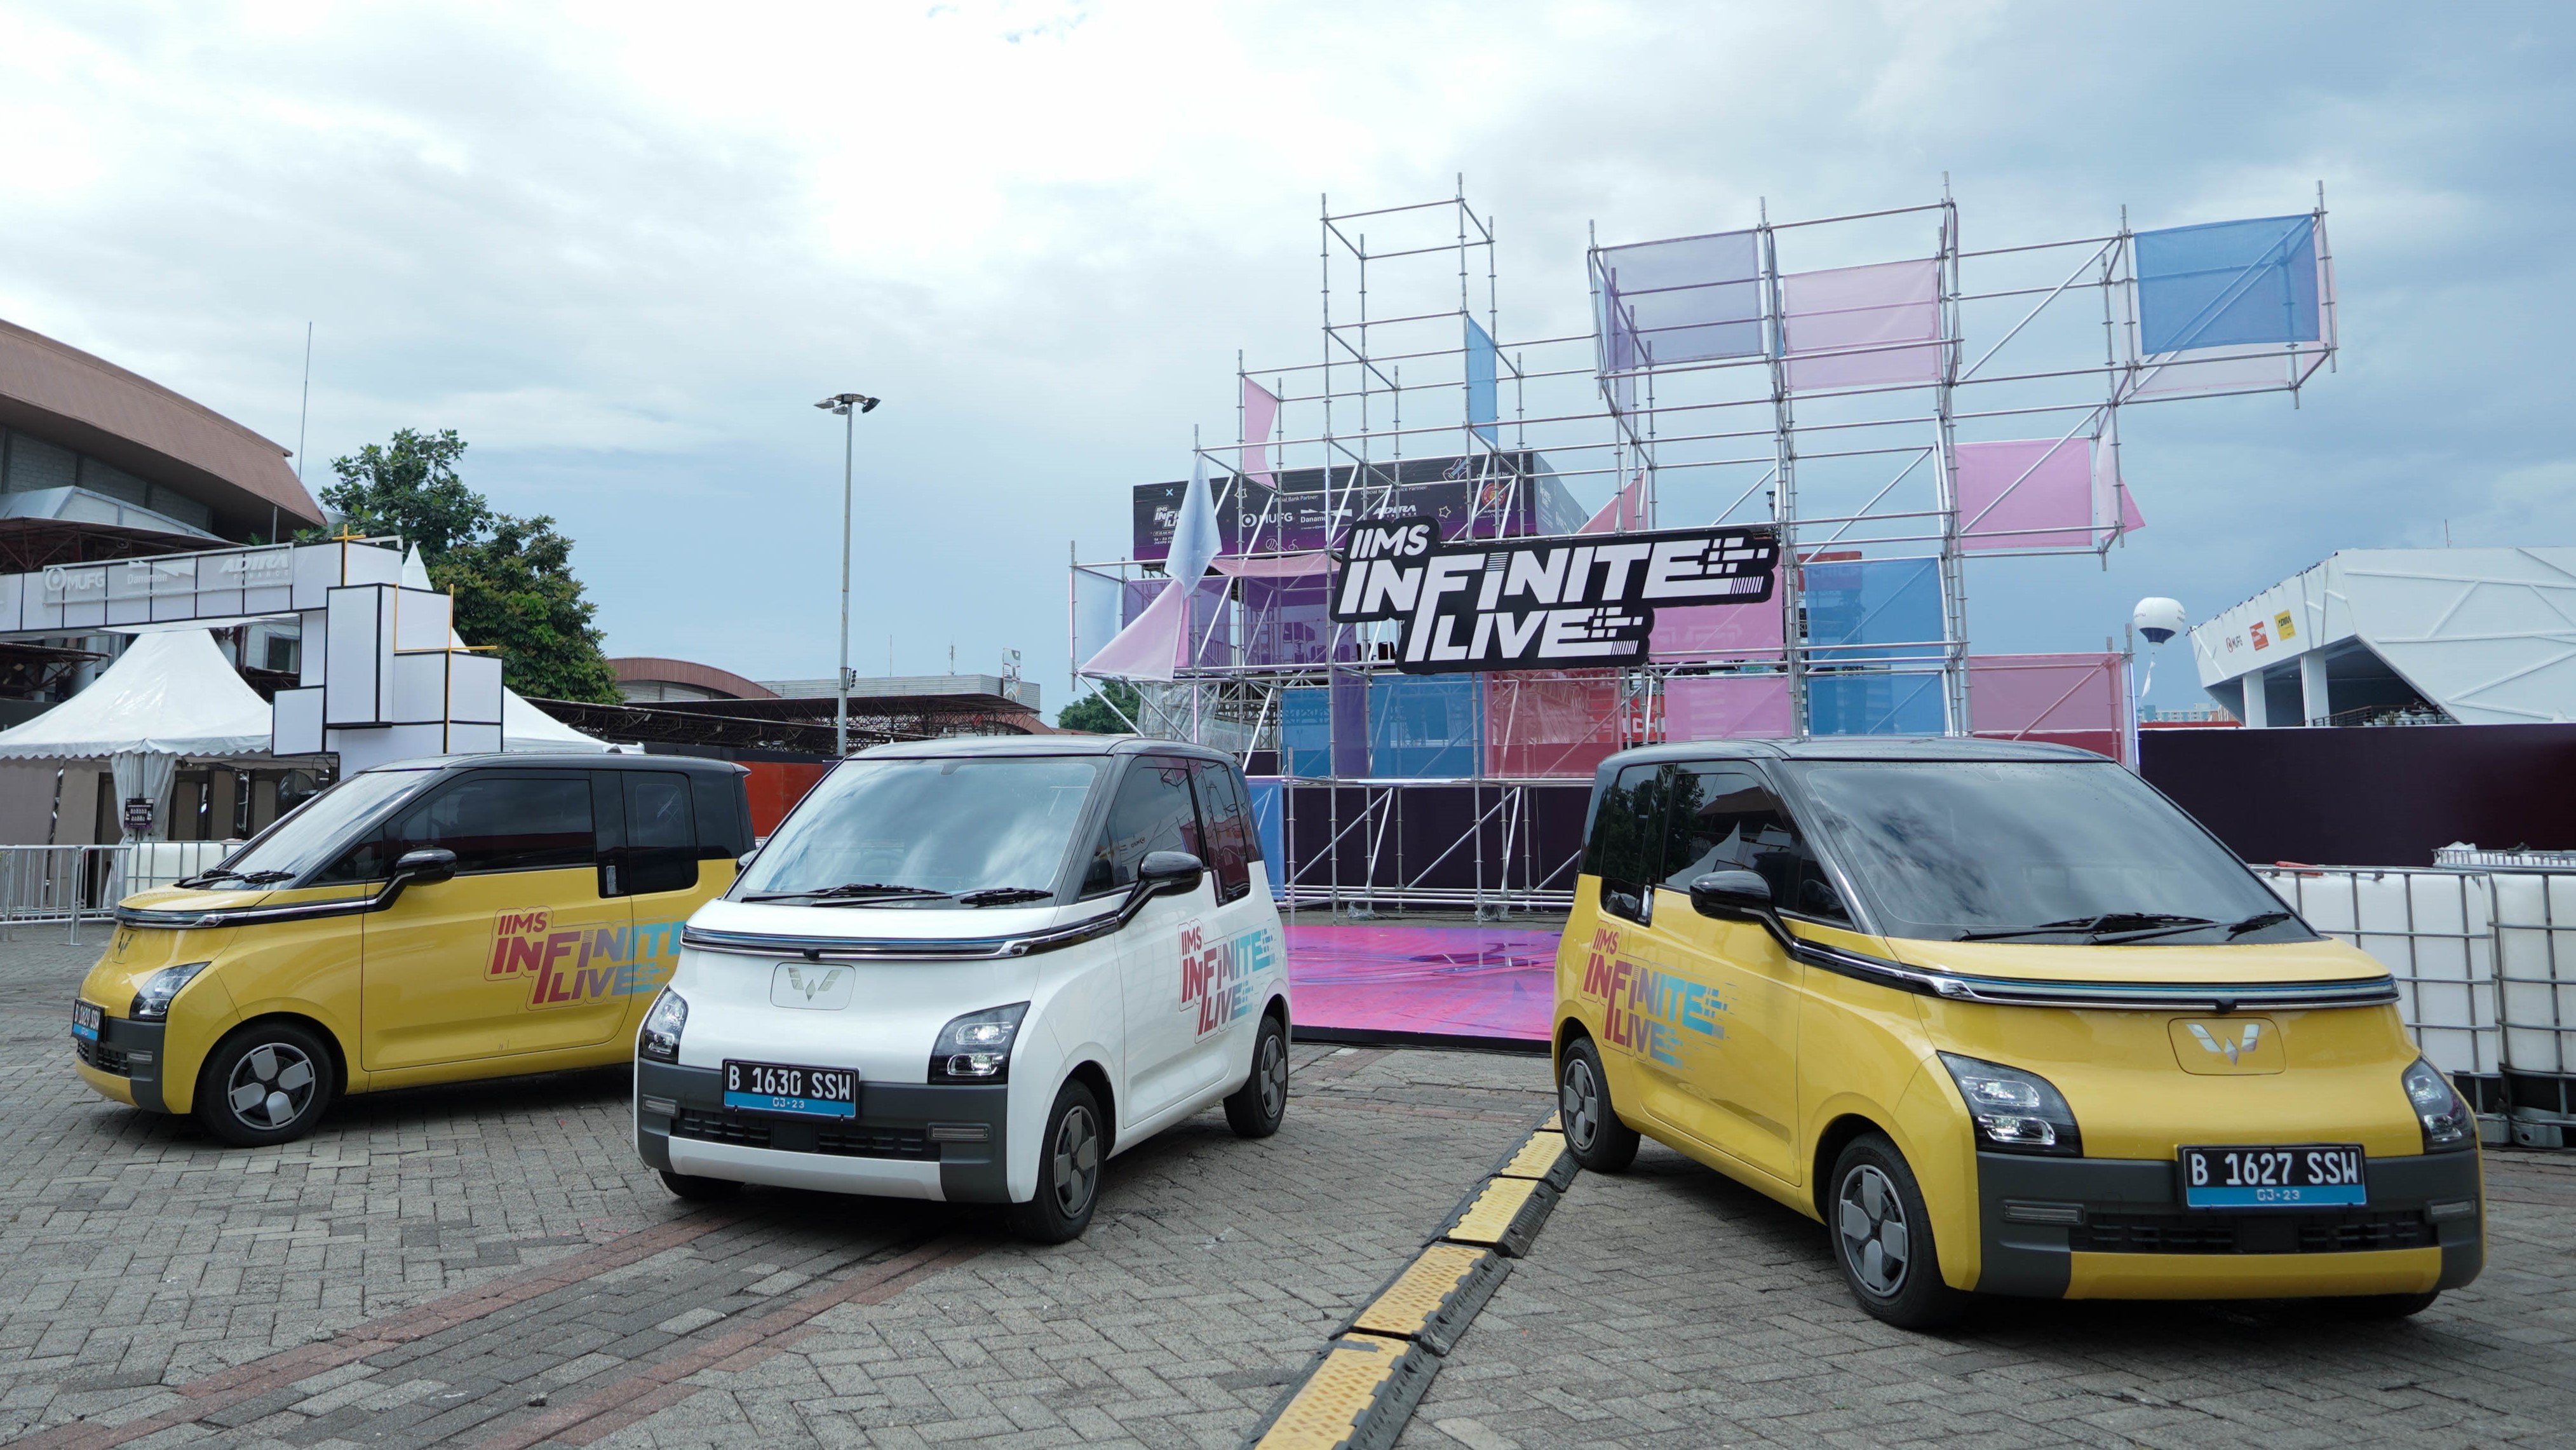 Image Wuling Air ev as Mobility Support for The Nation’s Performer During IIMS Infinite Live